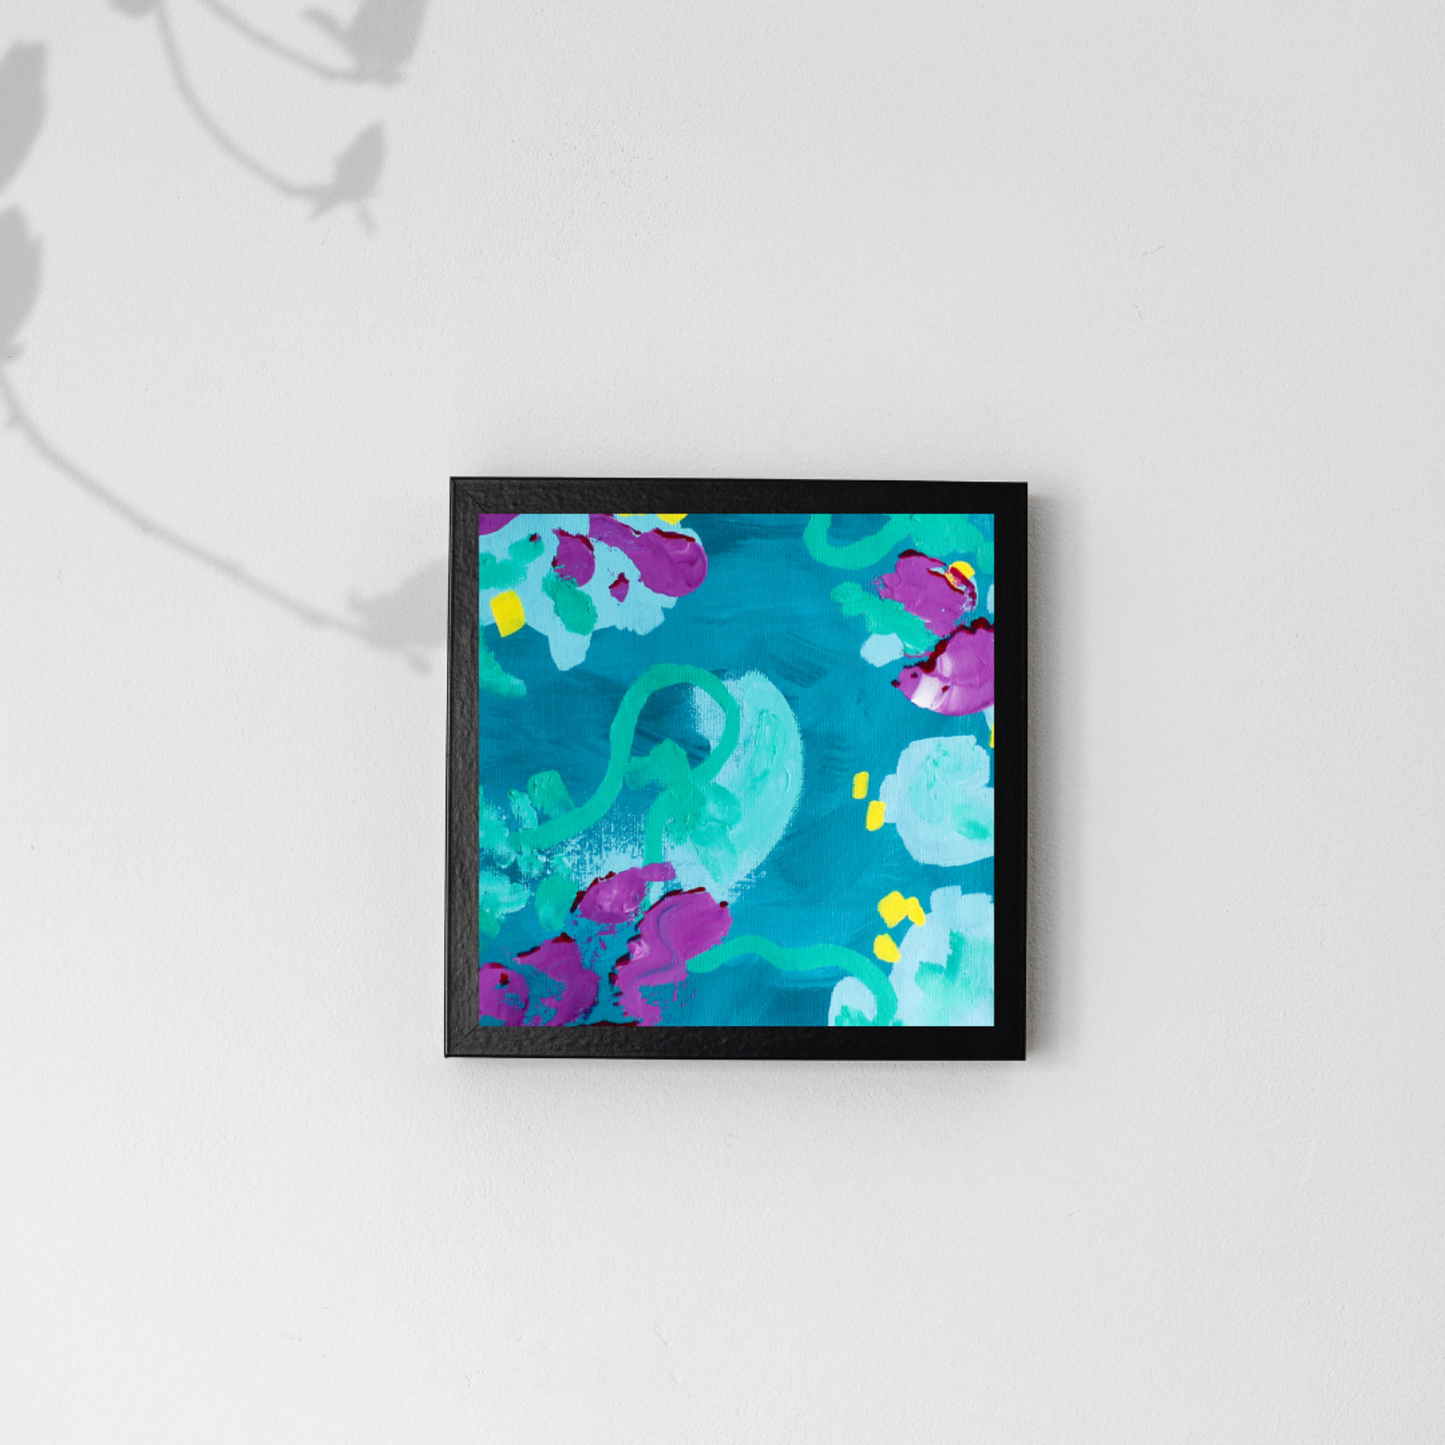 A grey wall with a shadow in the top left corner. In the middle is a black frame with an abstract blue, turquoise, and purple painting.